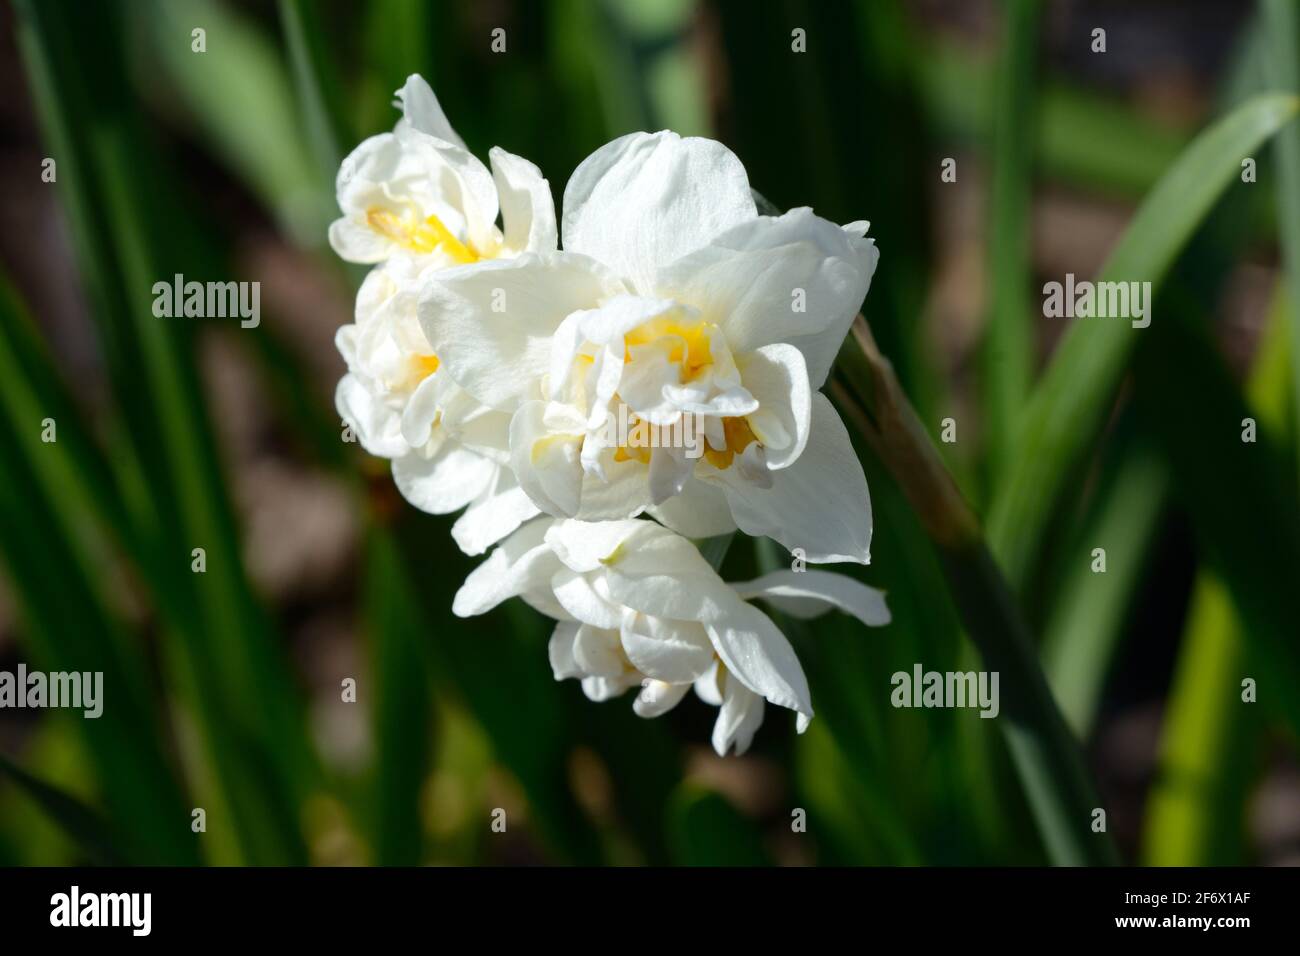 Narcissus Bridal Crown Daffodil Bridal Crown long lasting double daffodils Stock Photo